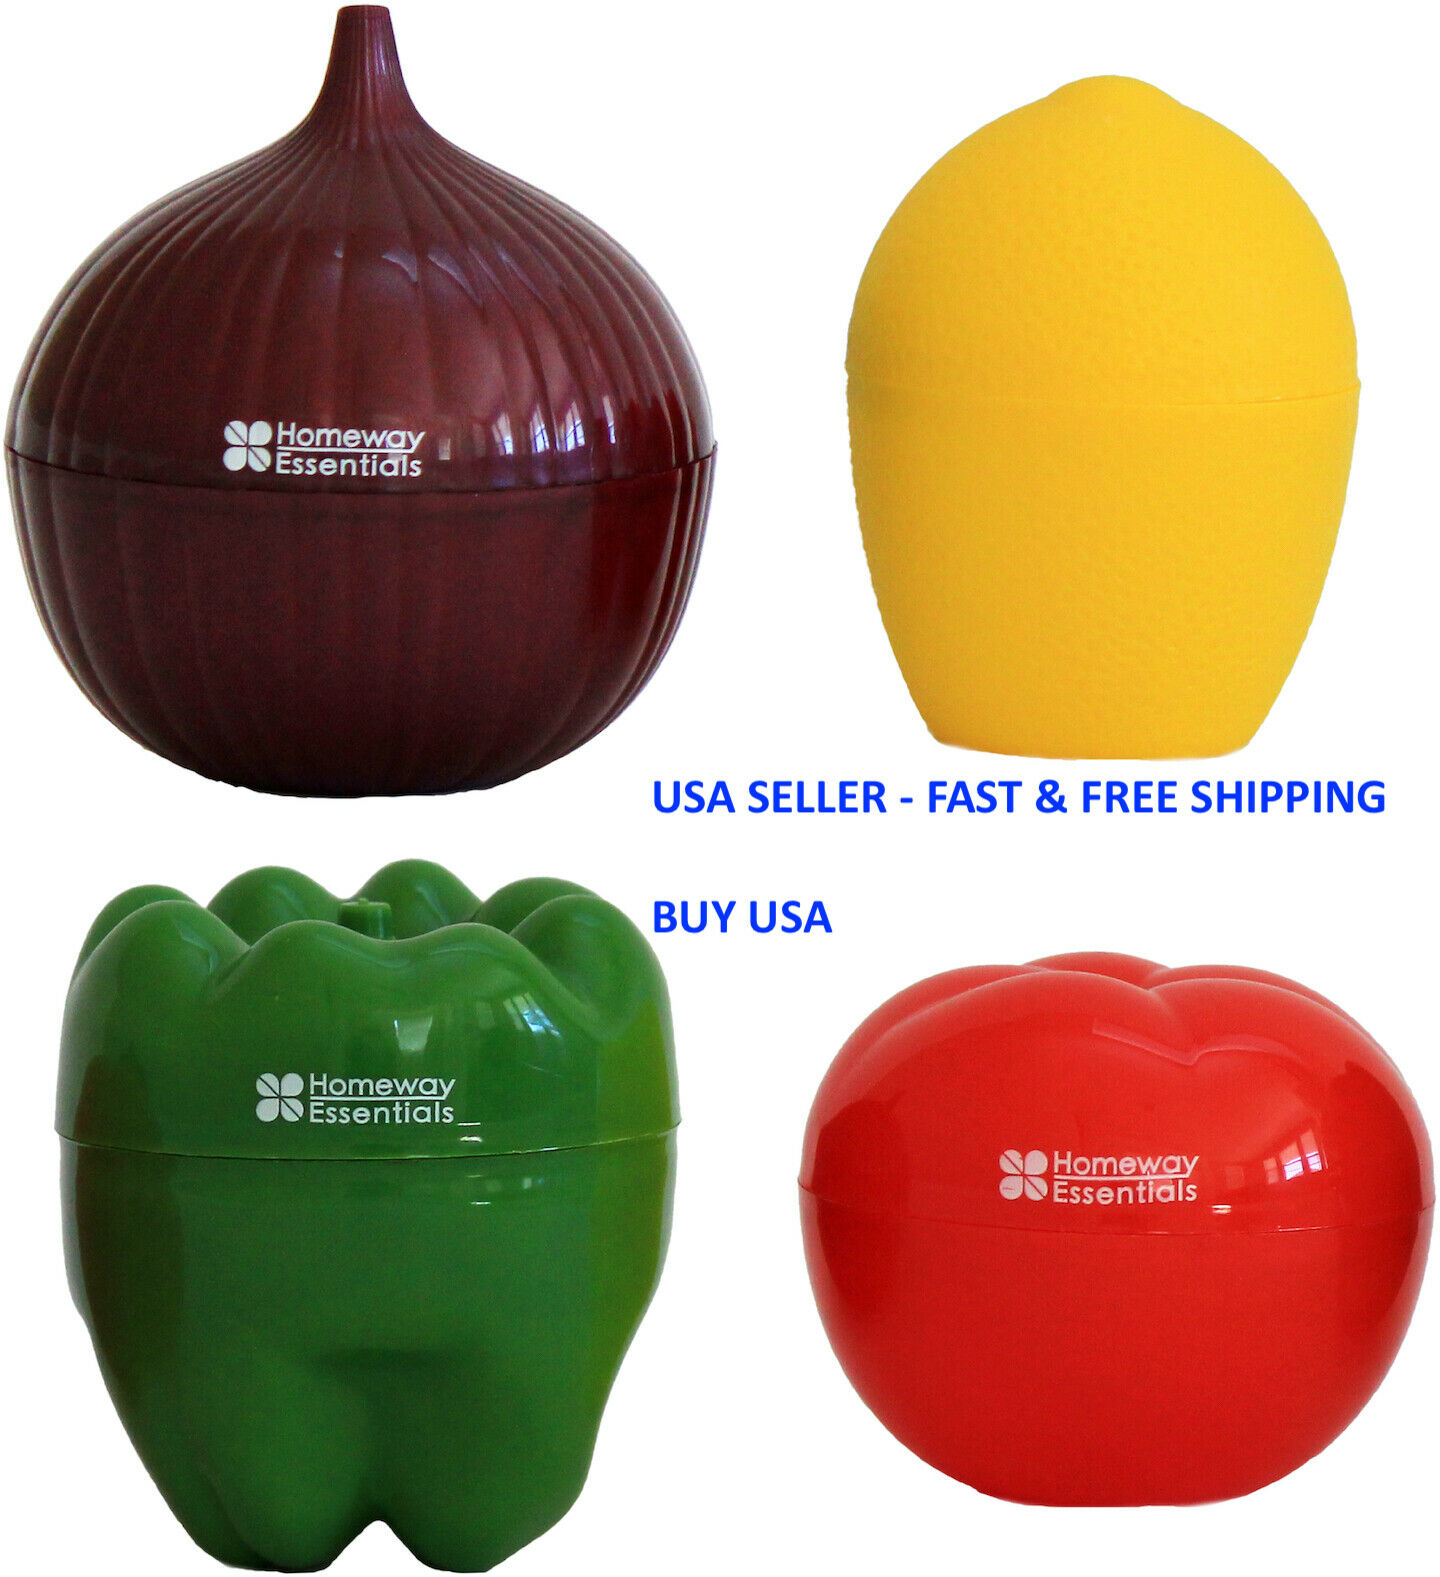 4pcs Containers Vegetable Storage With Onion Pepper Lemon Tomato Shaped Savers